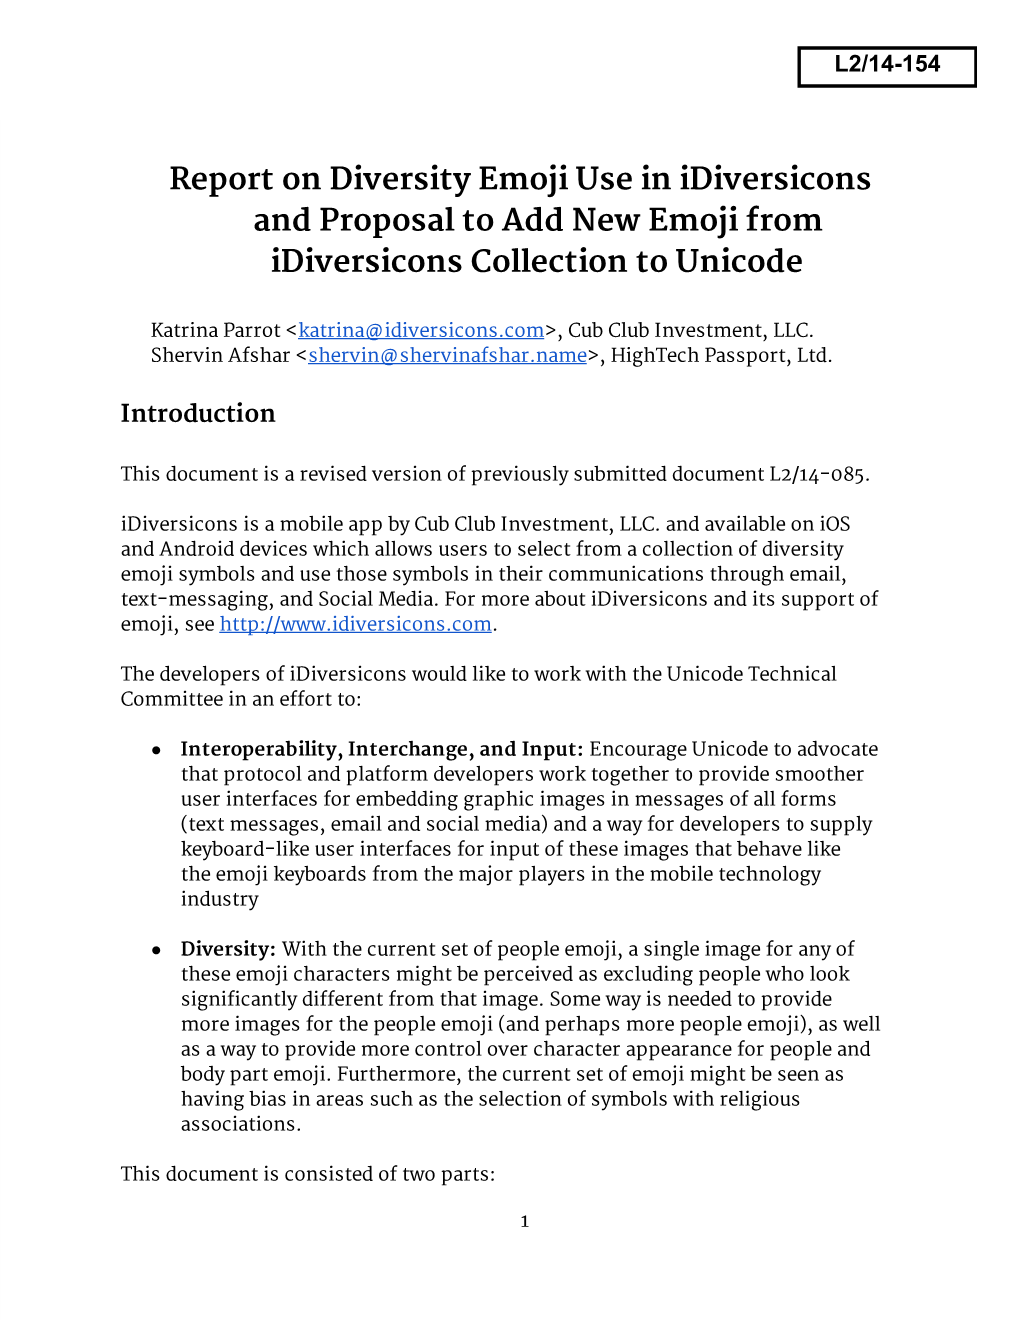 Report on Diversity Emoji Use in Idiversicons and Proposal to Add New Emoji from Idiversicons Collection to Unicode